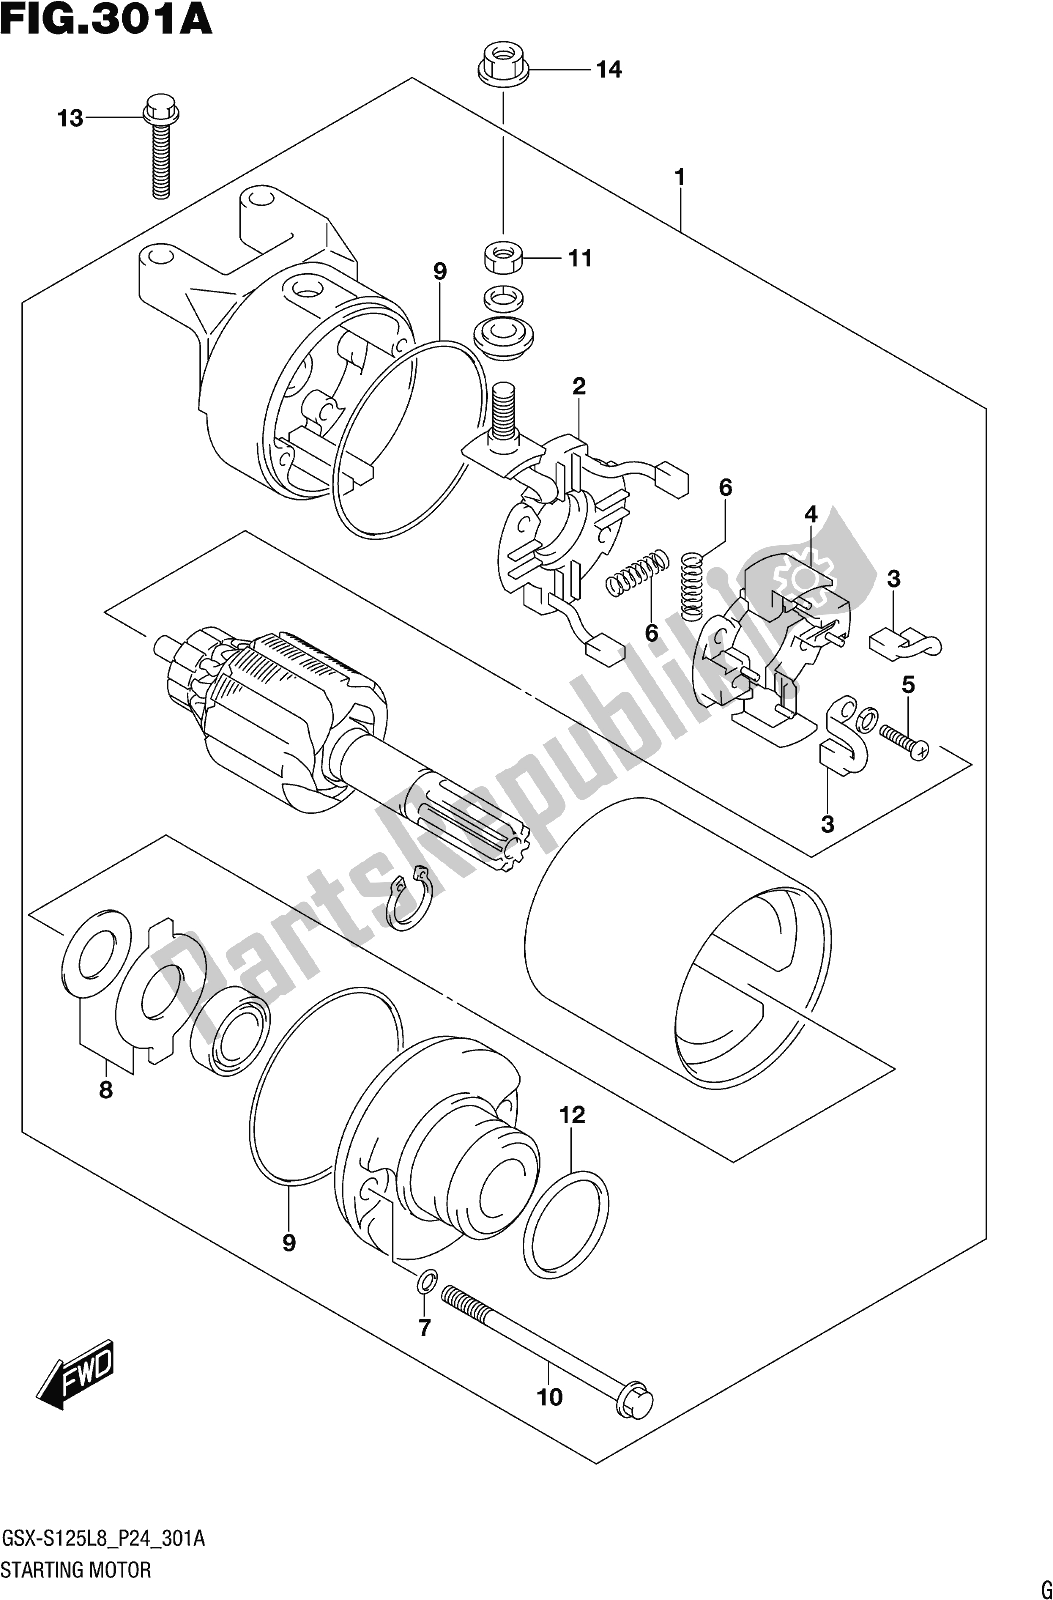 All parts for the Fig. 301a Starting Motor of the Suzuki Gsx-s 125 MLX 2018